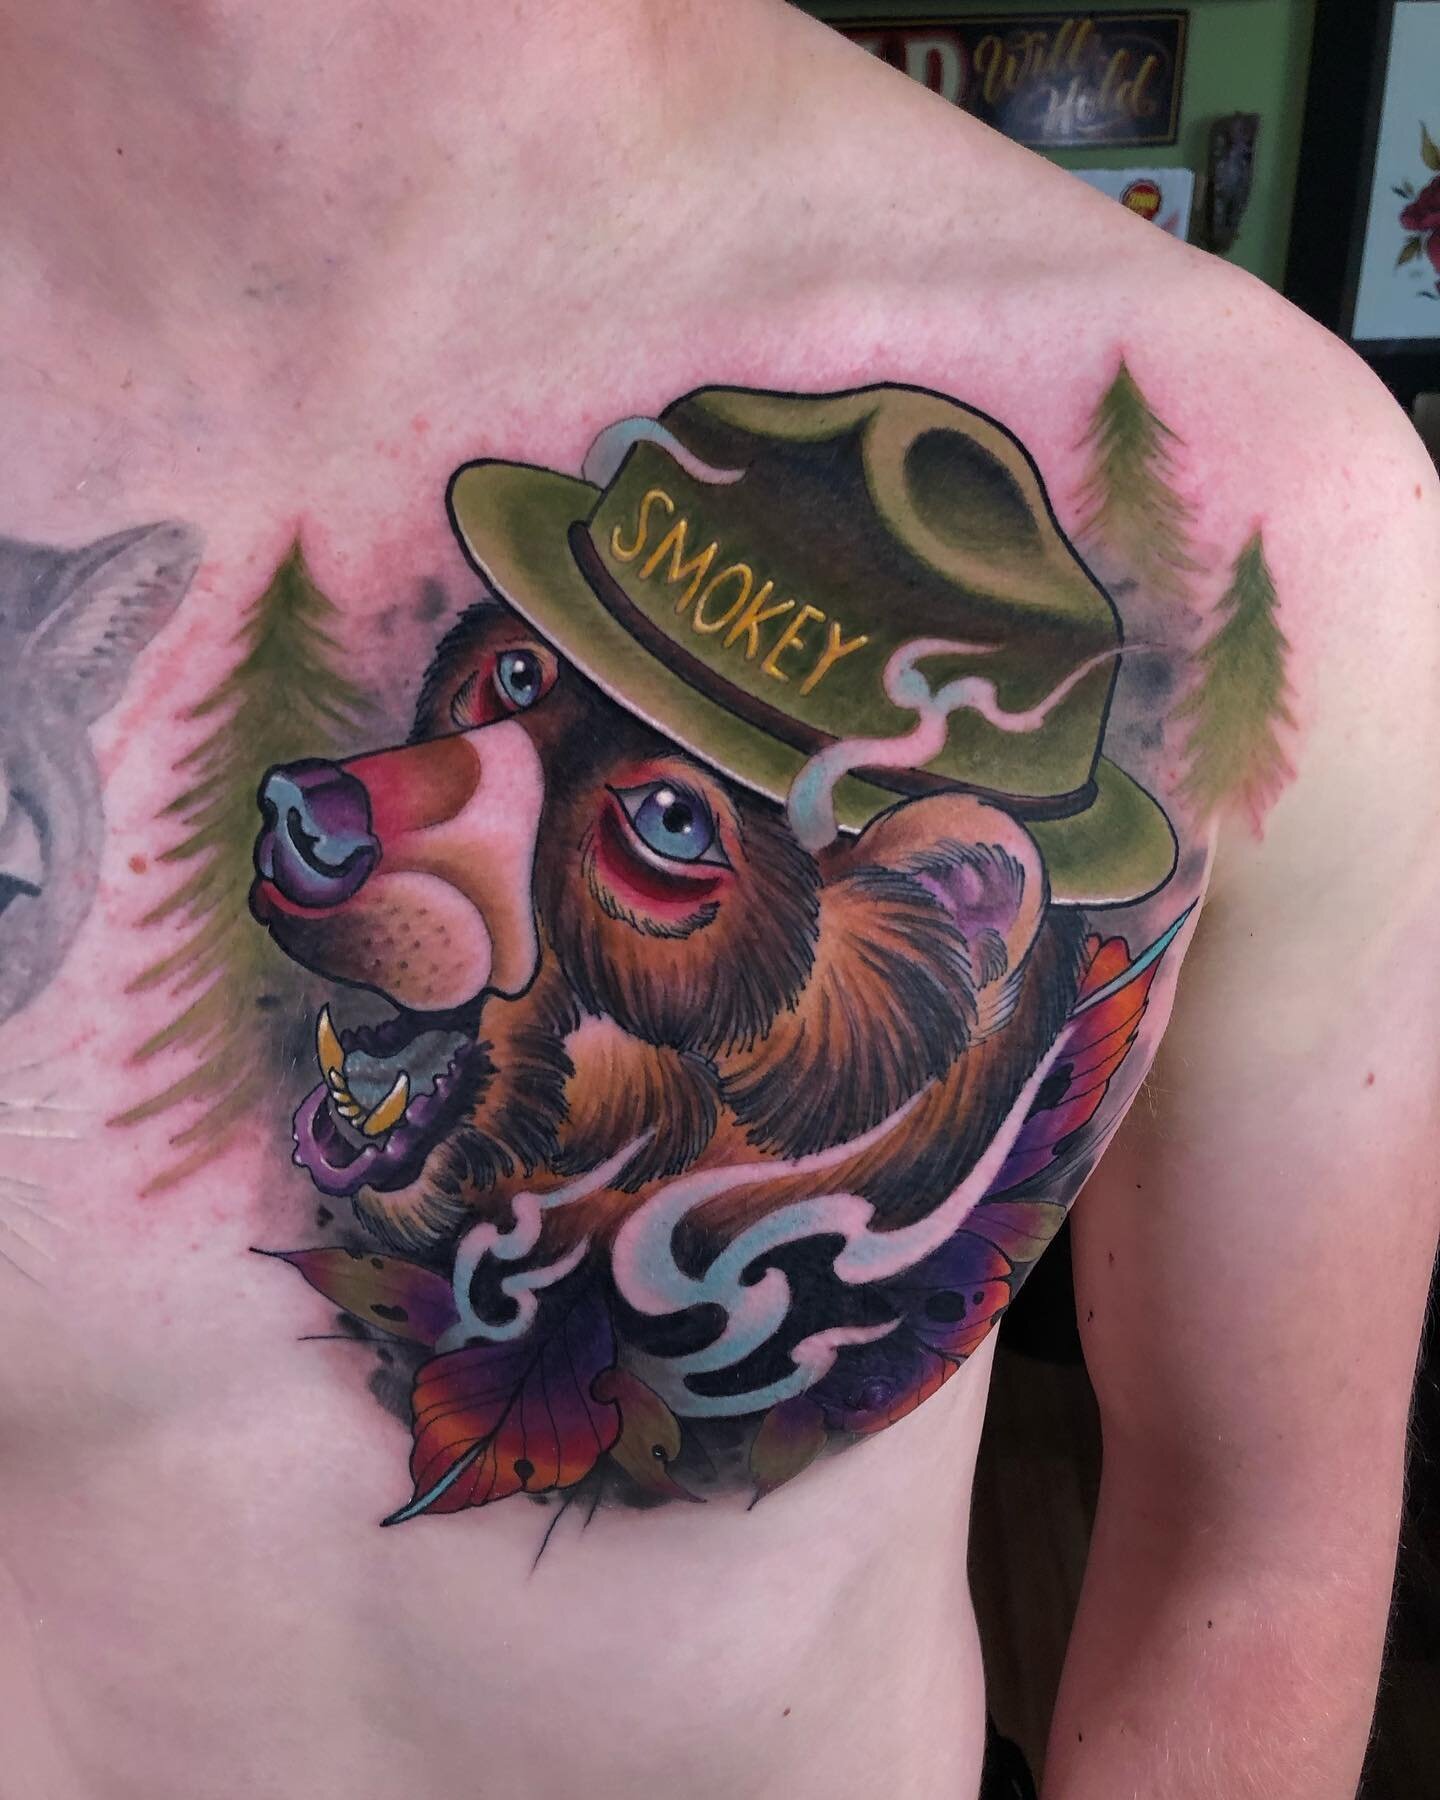 Only you can prevent forest fires 🐻🔥This Smokey Bear had been up for grabs for awhile after it&rsquo;s original client no showed. I always knew it would find a better home. Thanks again, Dakota!
&bull;
To book an appointment, hit the link in my bio